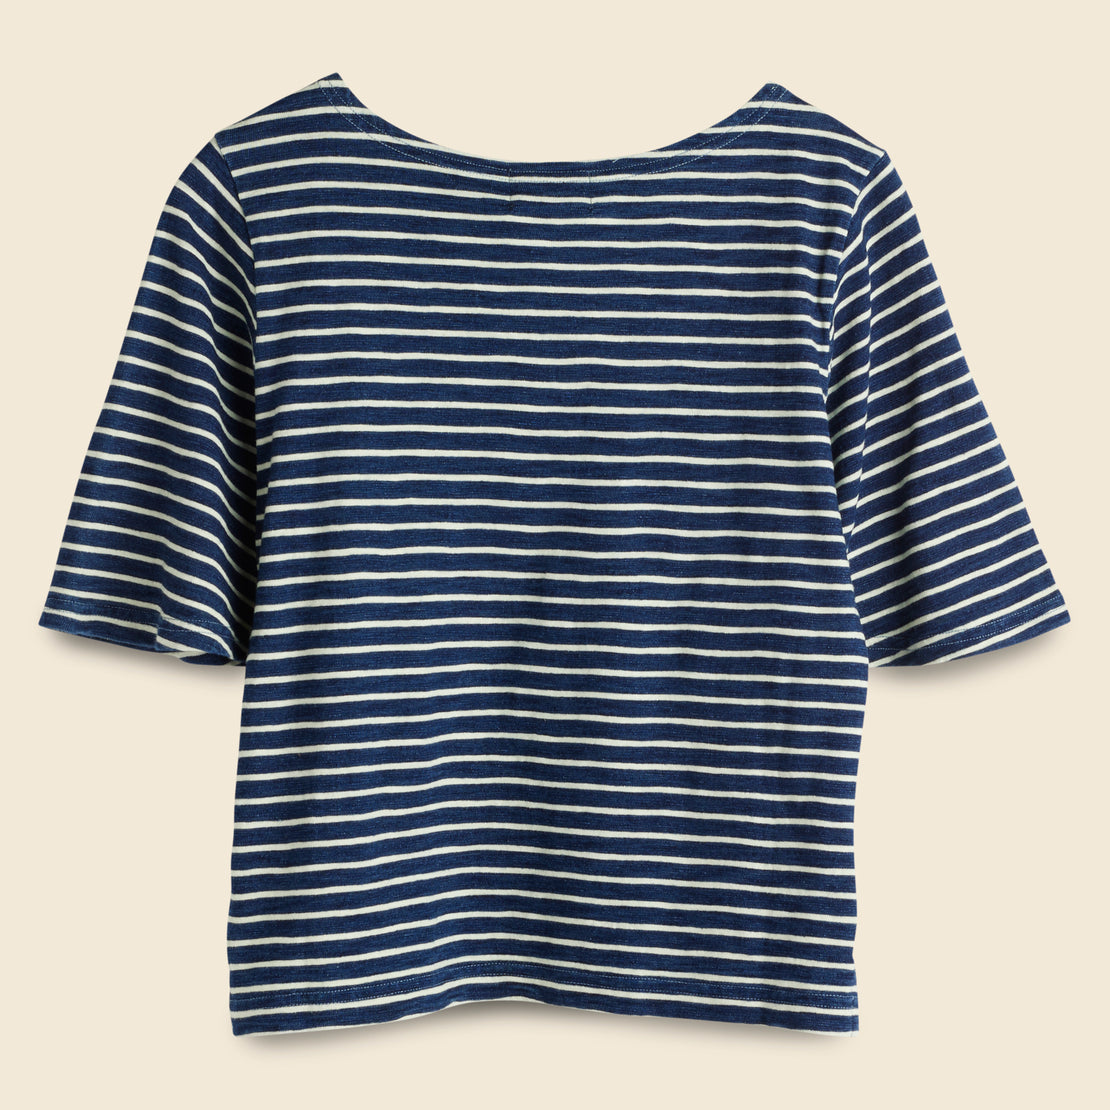 Boat Neck Tee - Indigo/Greige Stripe - RRL - STAG Provisions - W - Tops - S/S Tee